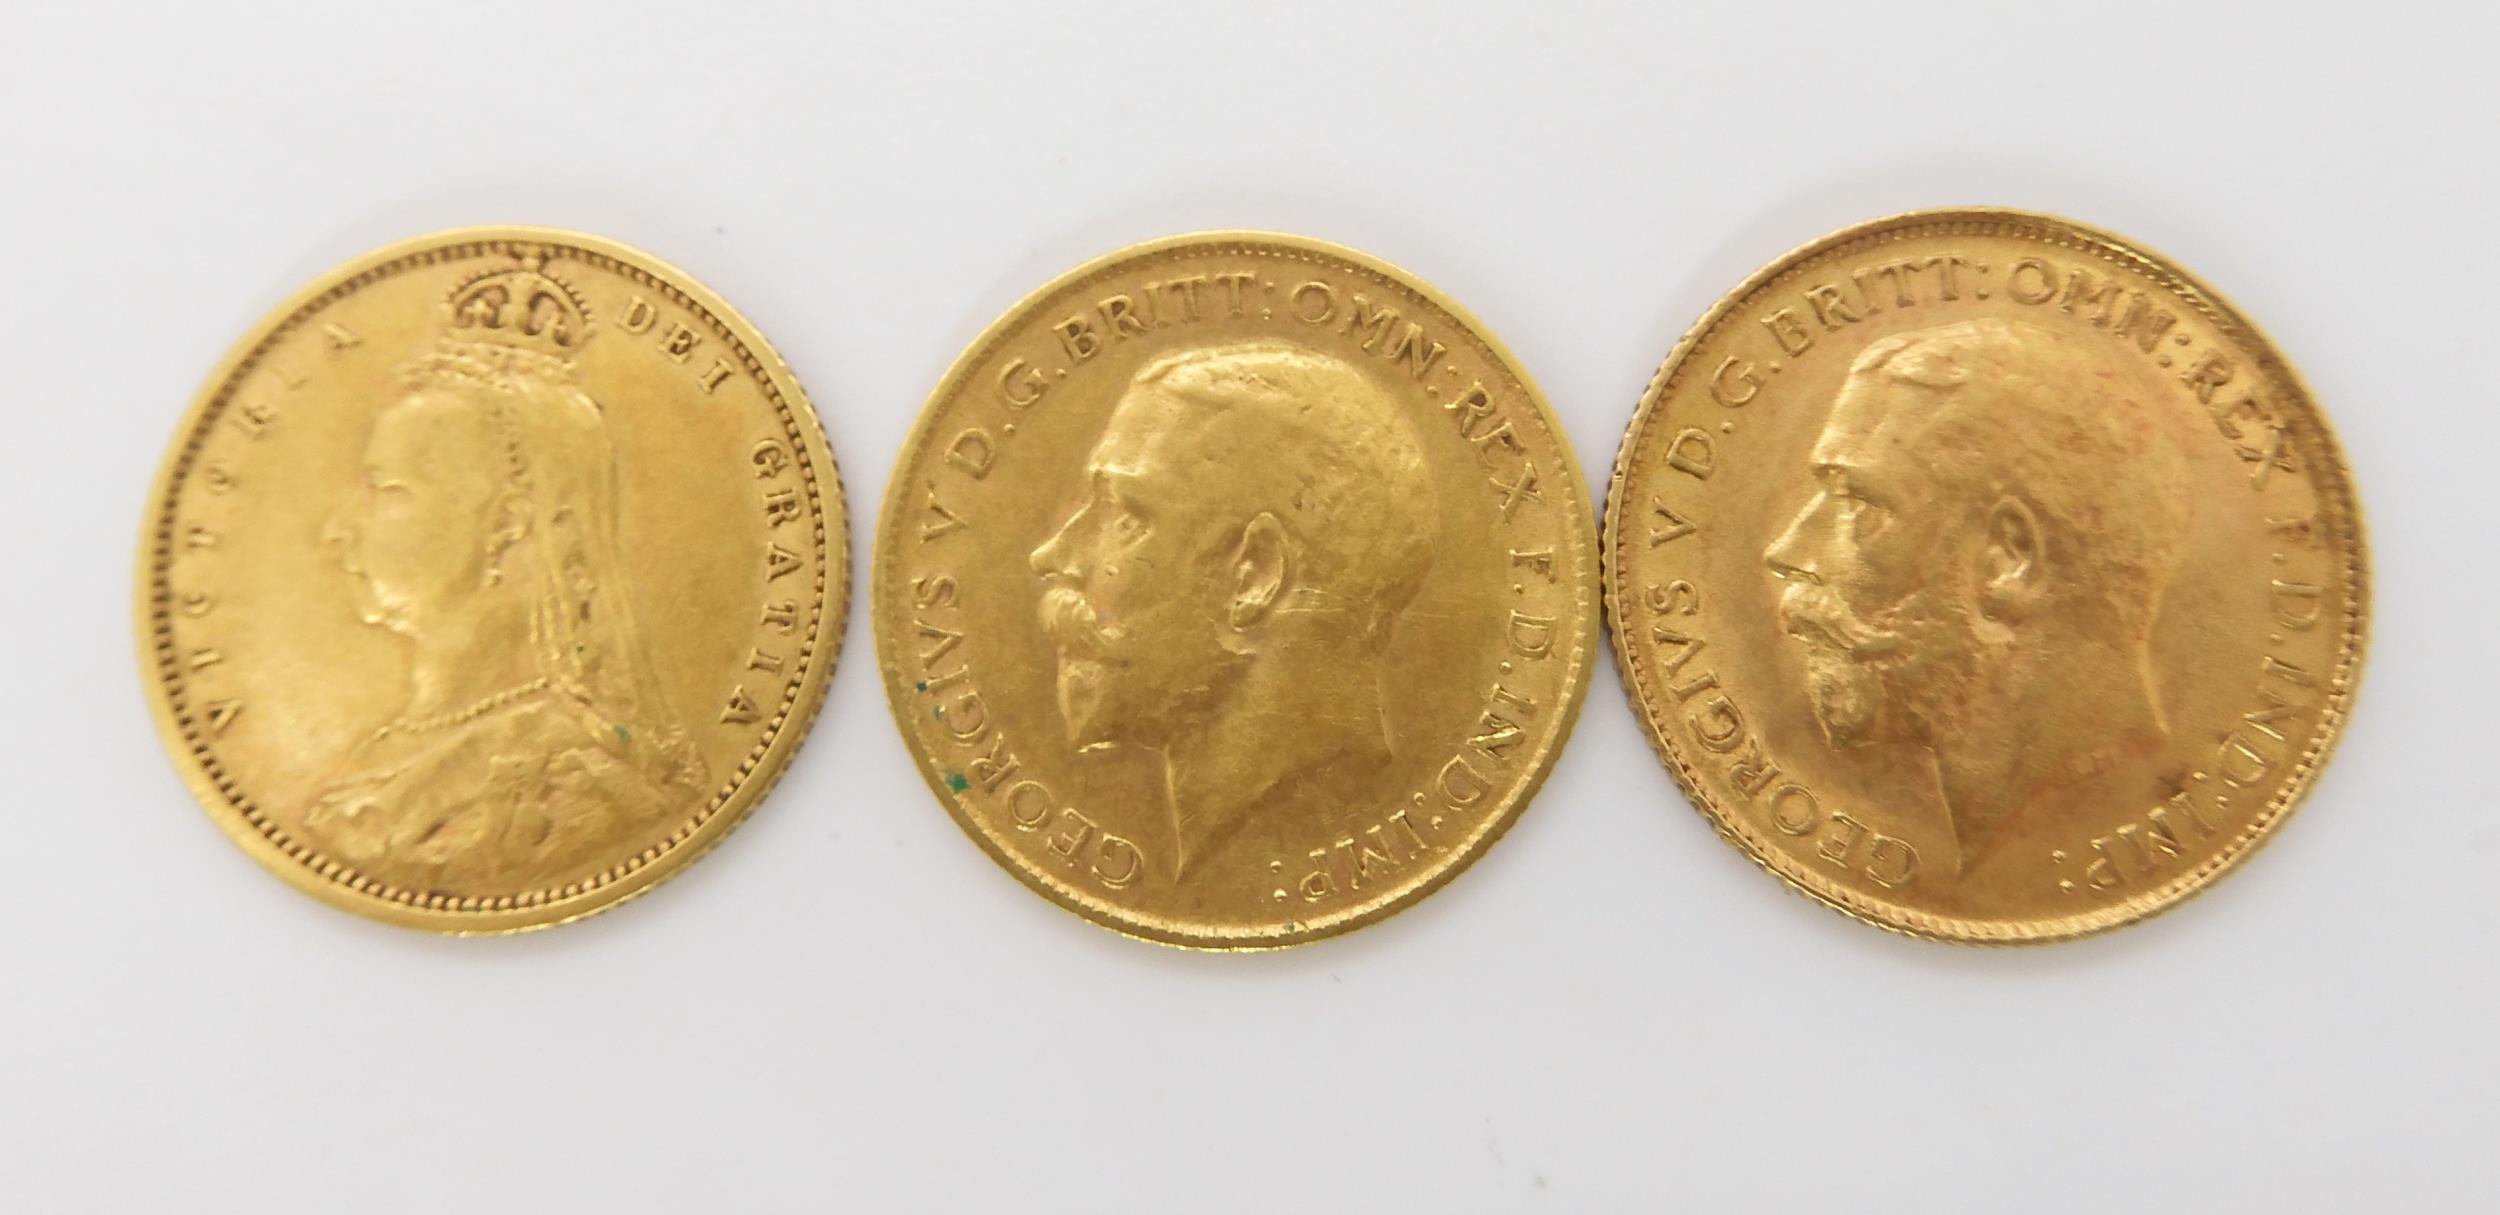 An 1892 Victoria gold shield back half sovereign, together with two George V half sovereigns dated